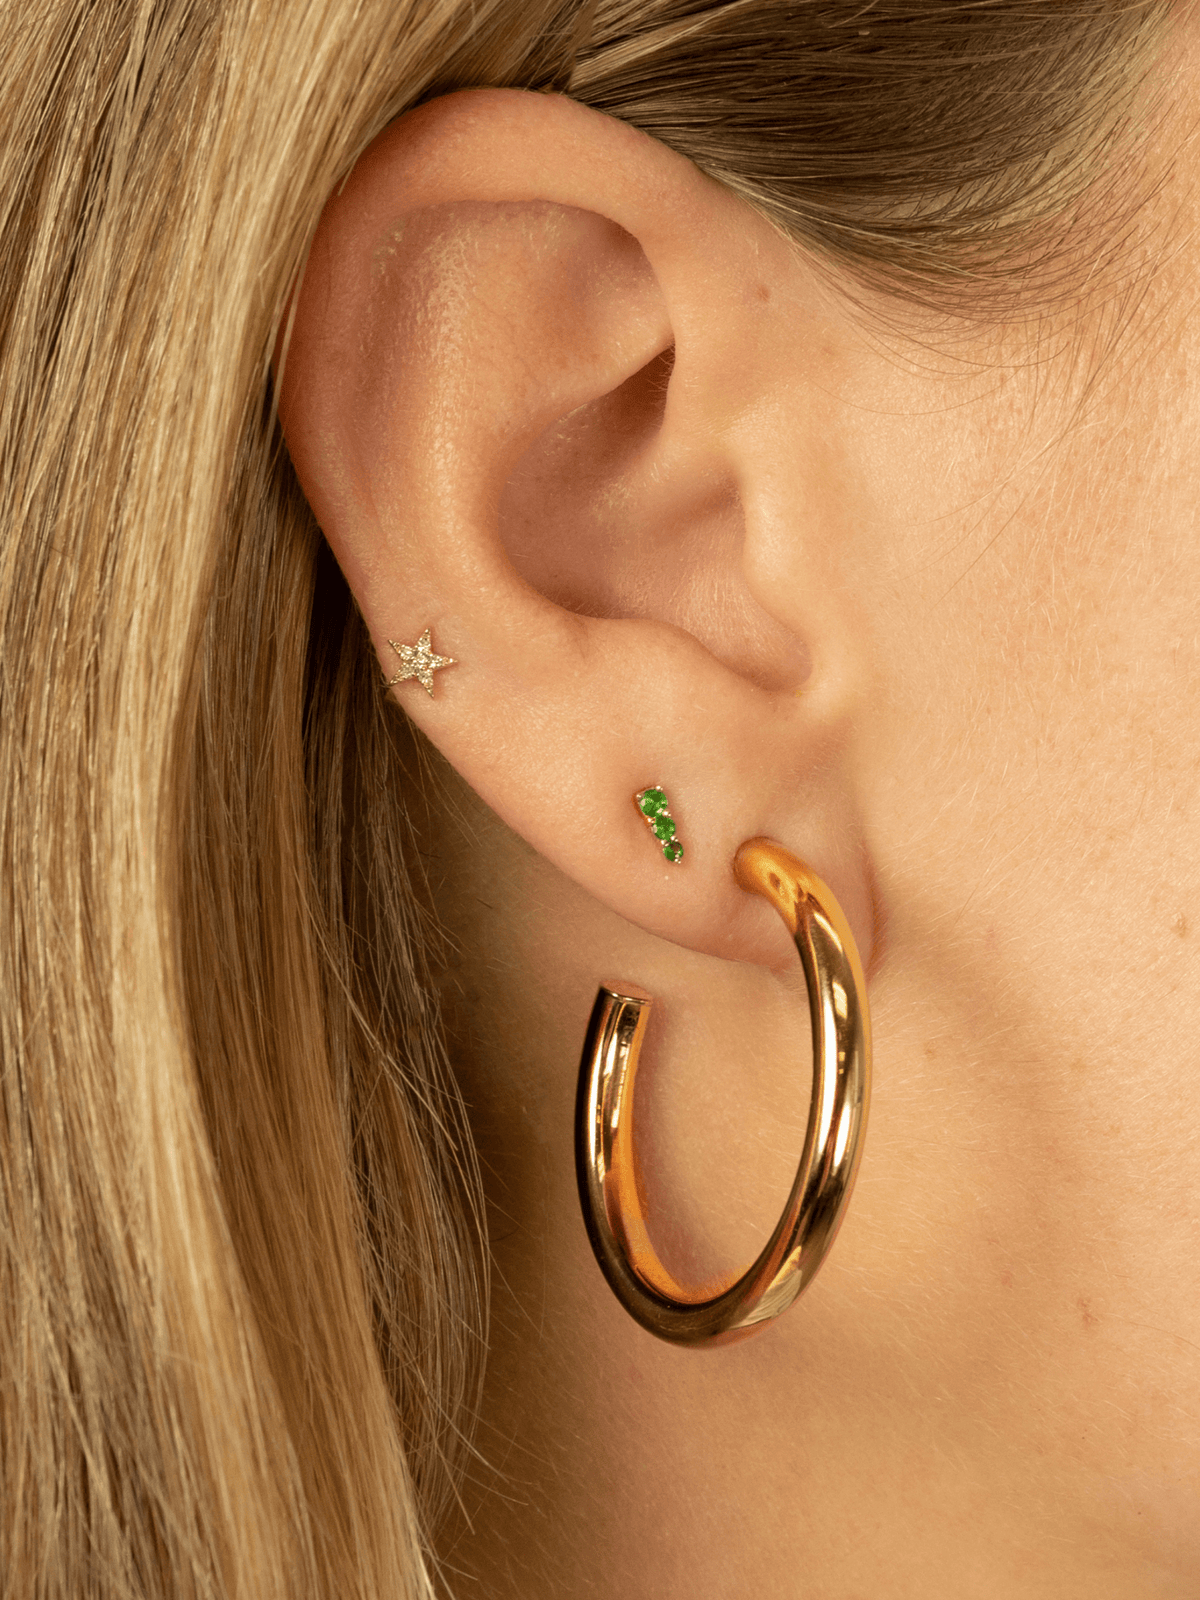 Tsavorite earrings yellow gold paired with diamond str stud and chunky gold hoop